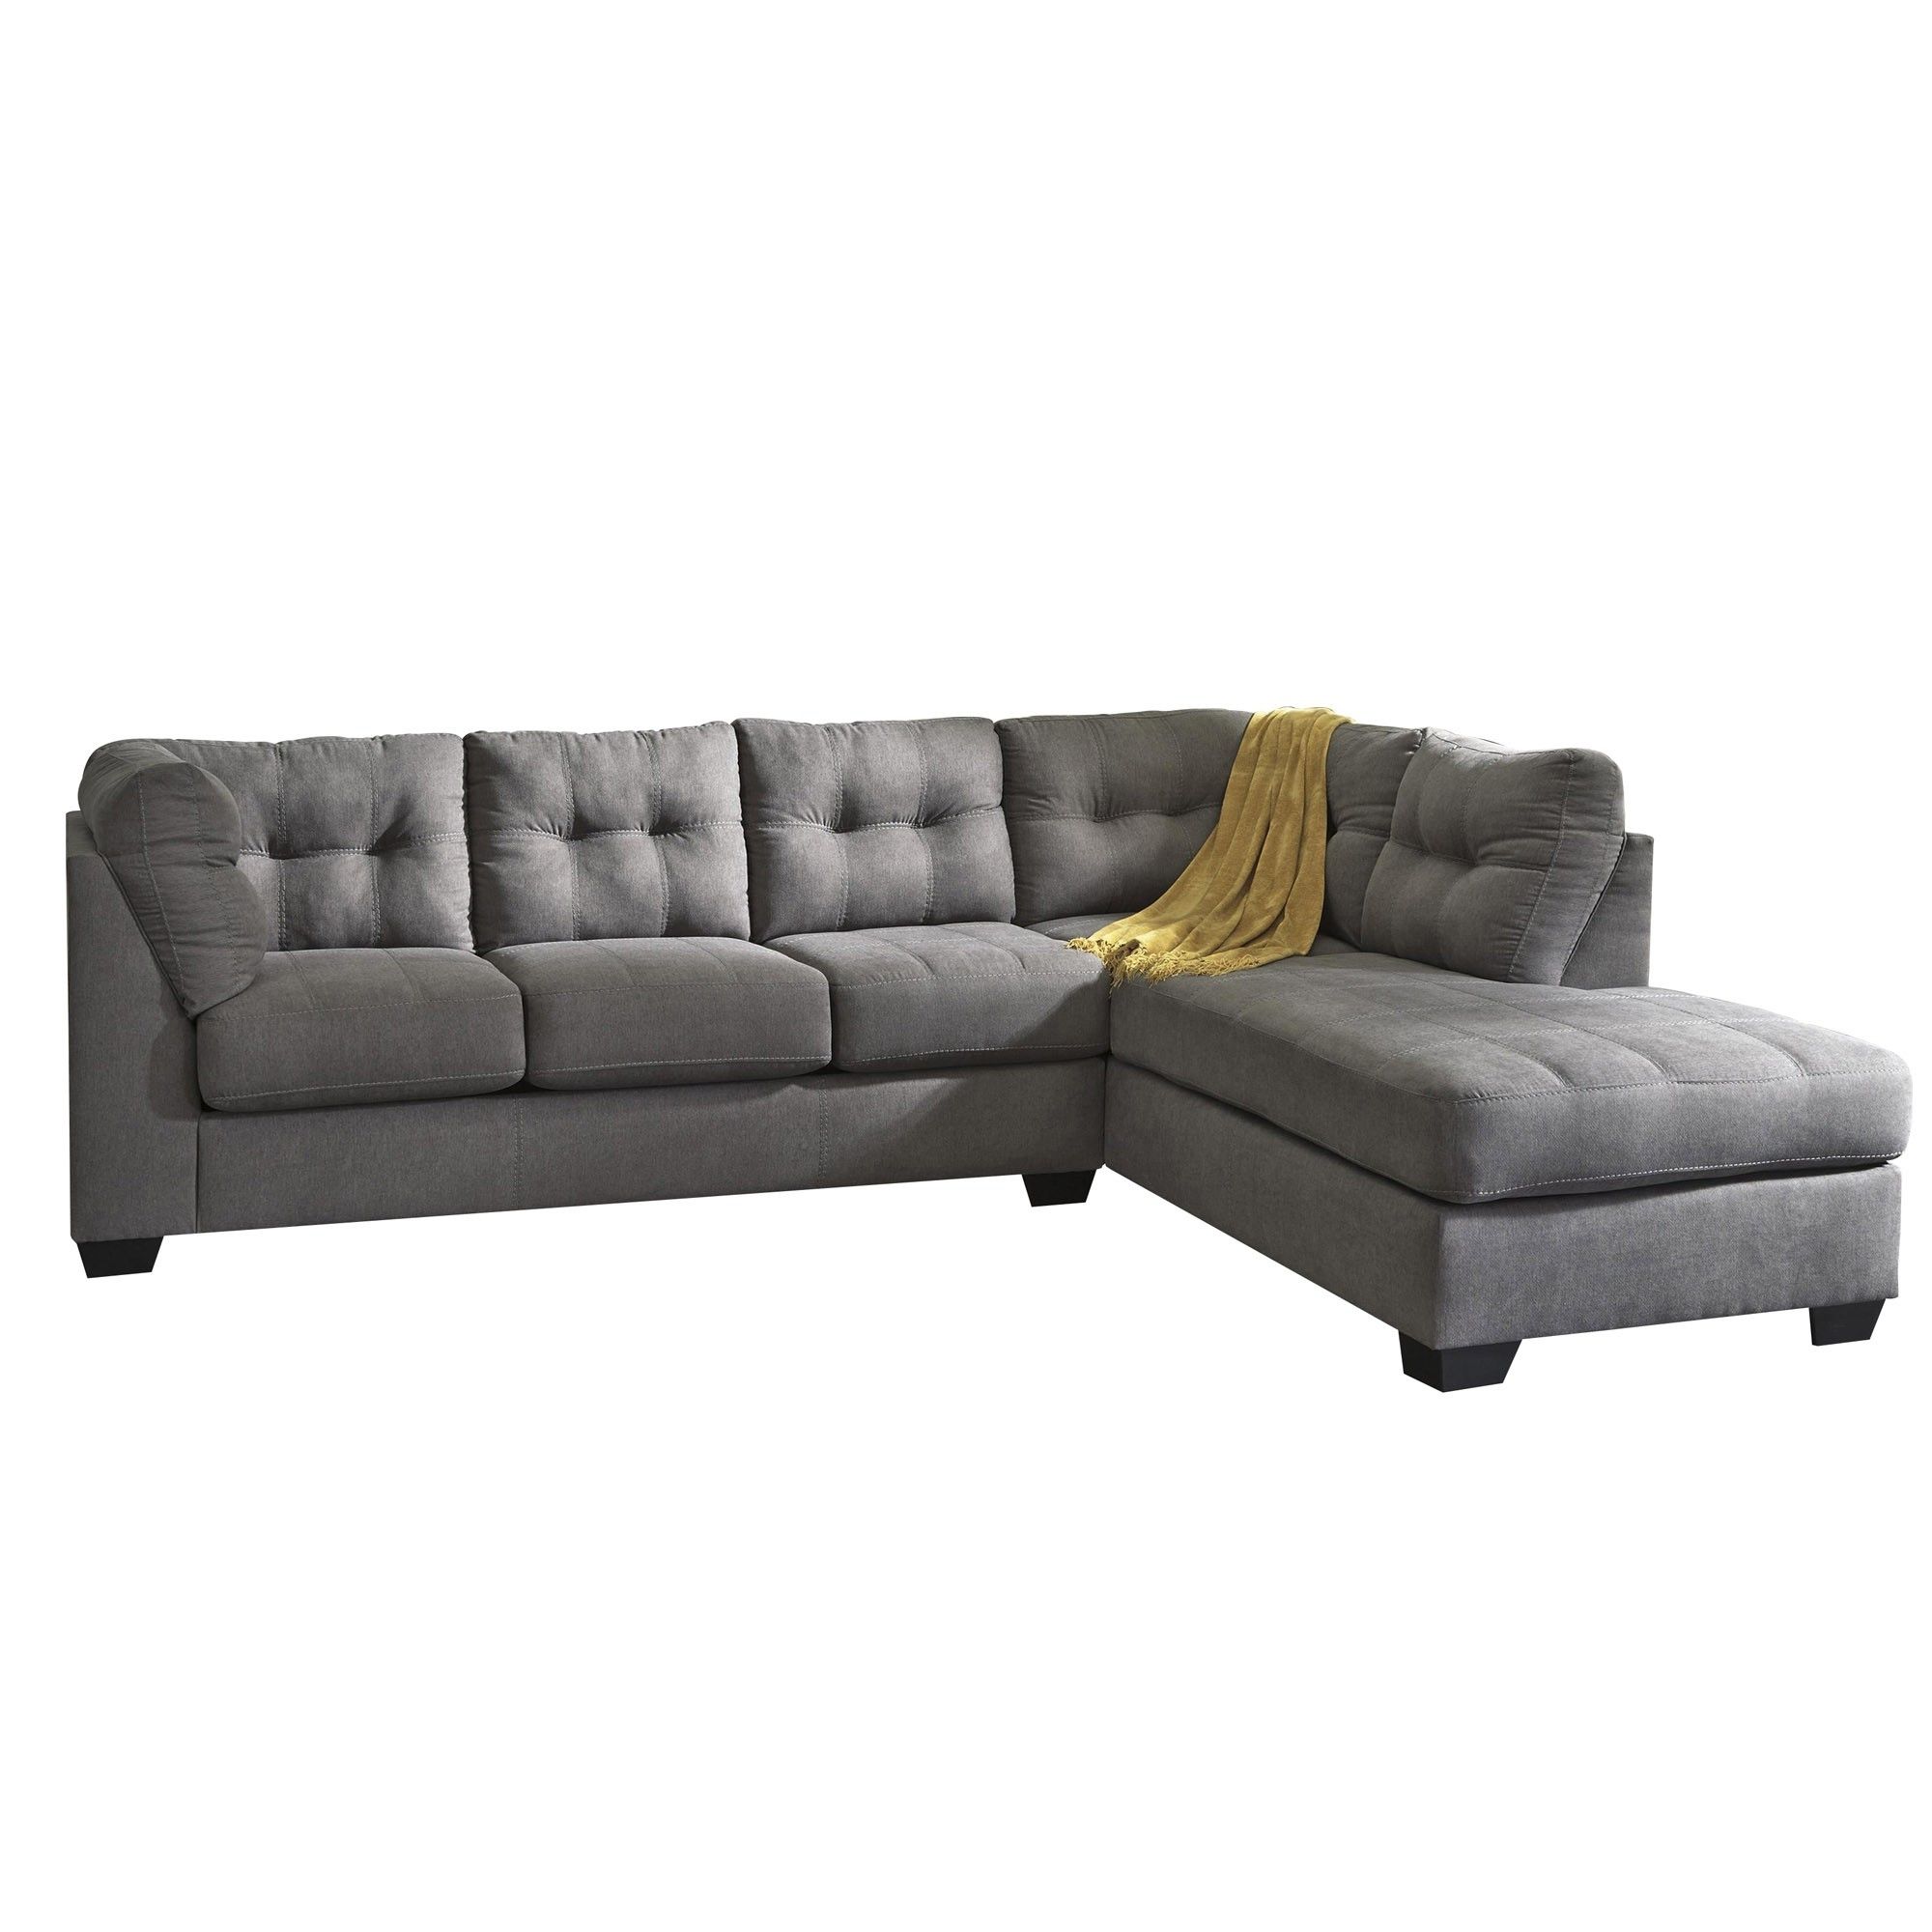 Sectionals | Tepperman's With Teppermans Sectional Sofas (View 3 of 10)